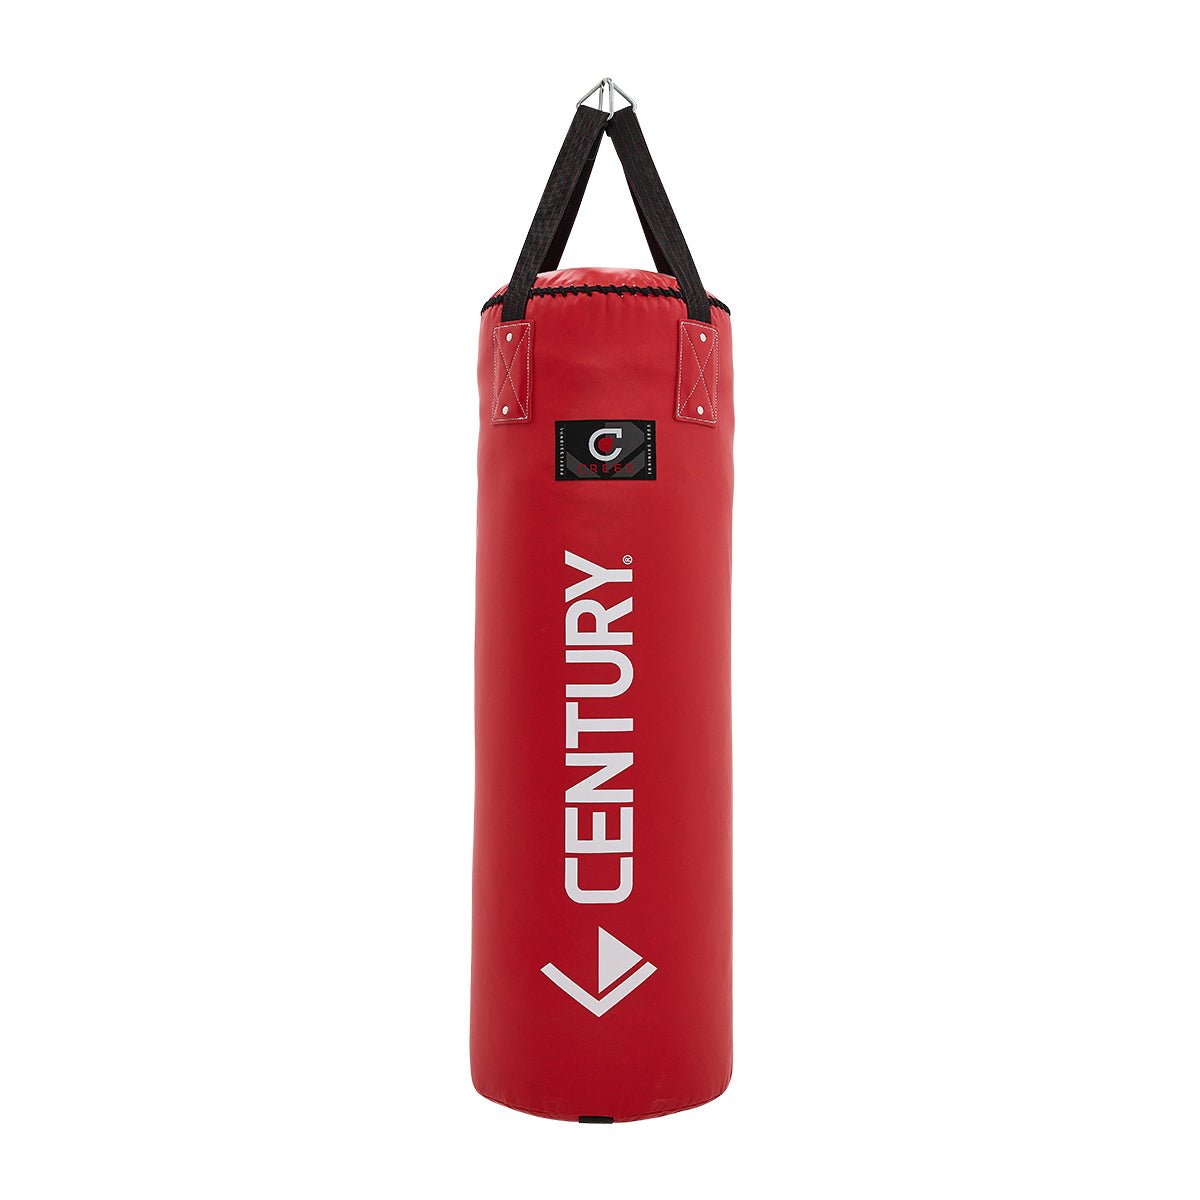 CREED Foam Lined 100 lb. Heavy Bag 100 lbs. Red